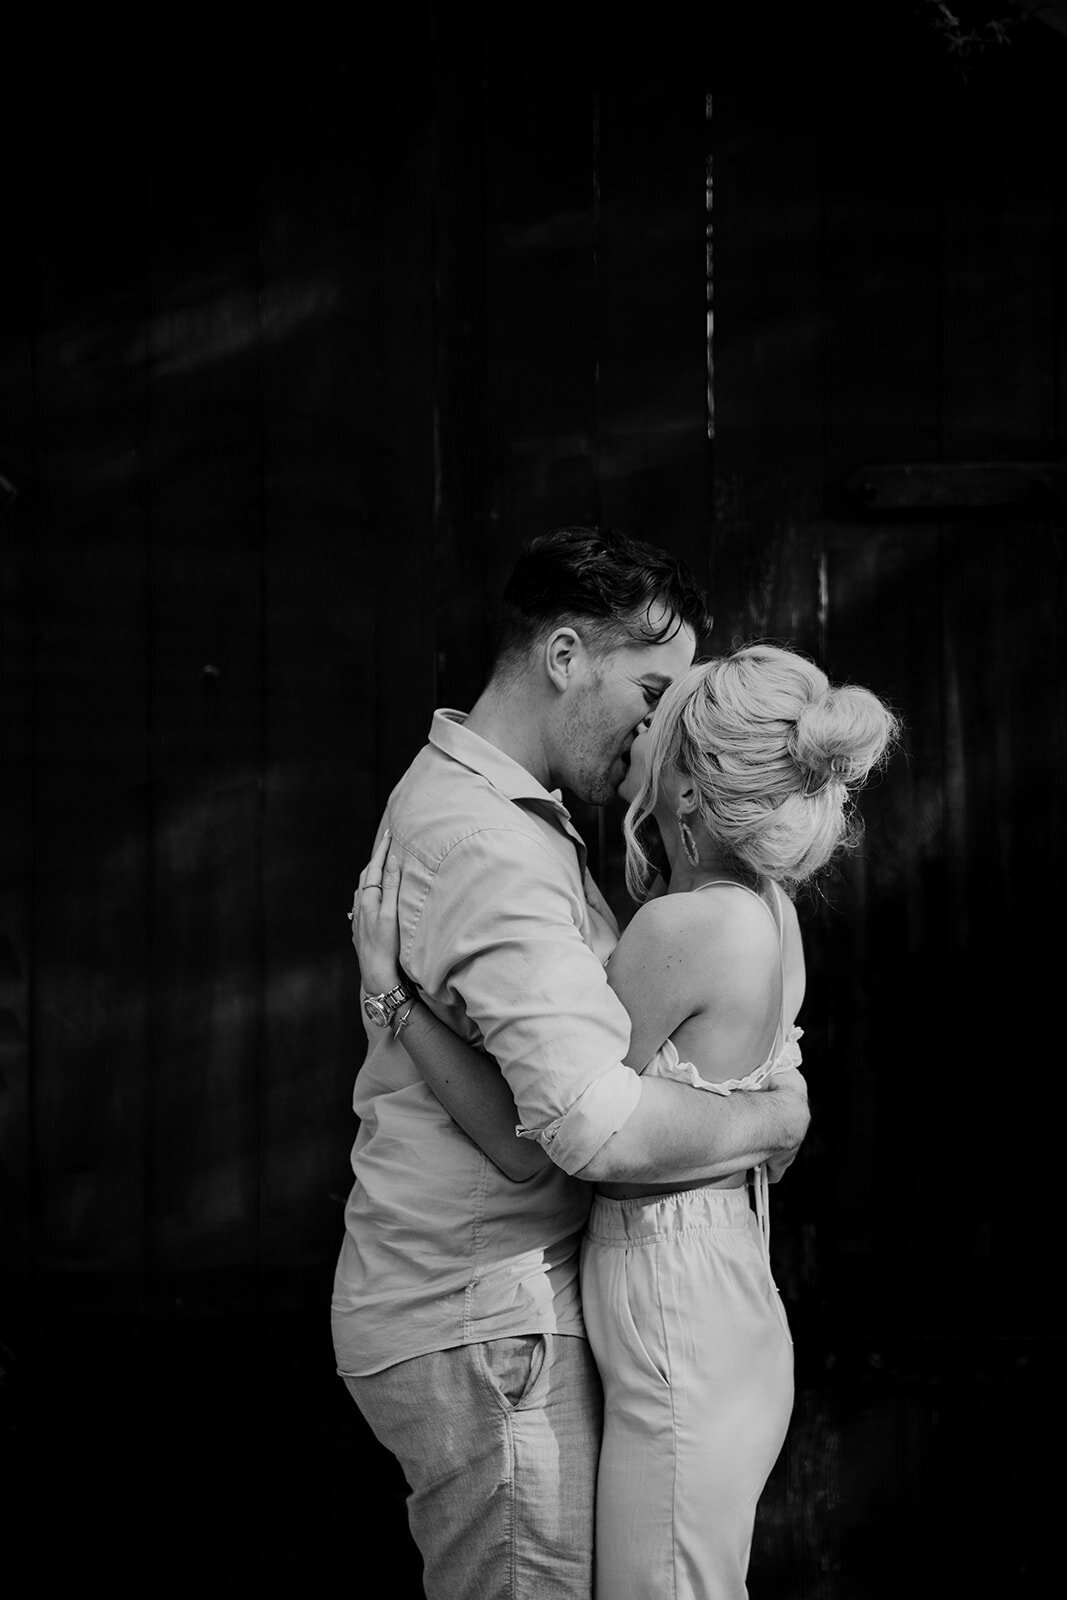 Couple in bright cloth kissing with black background